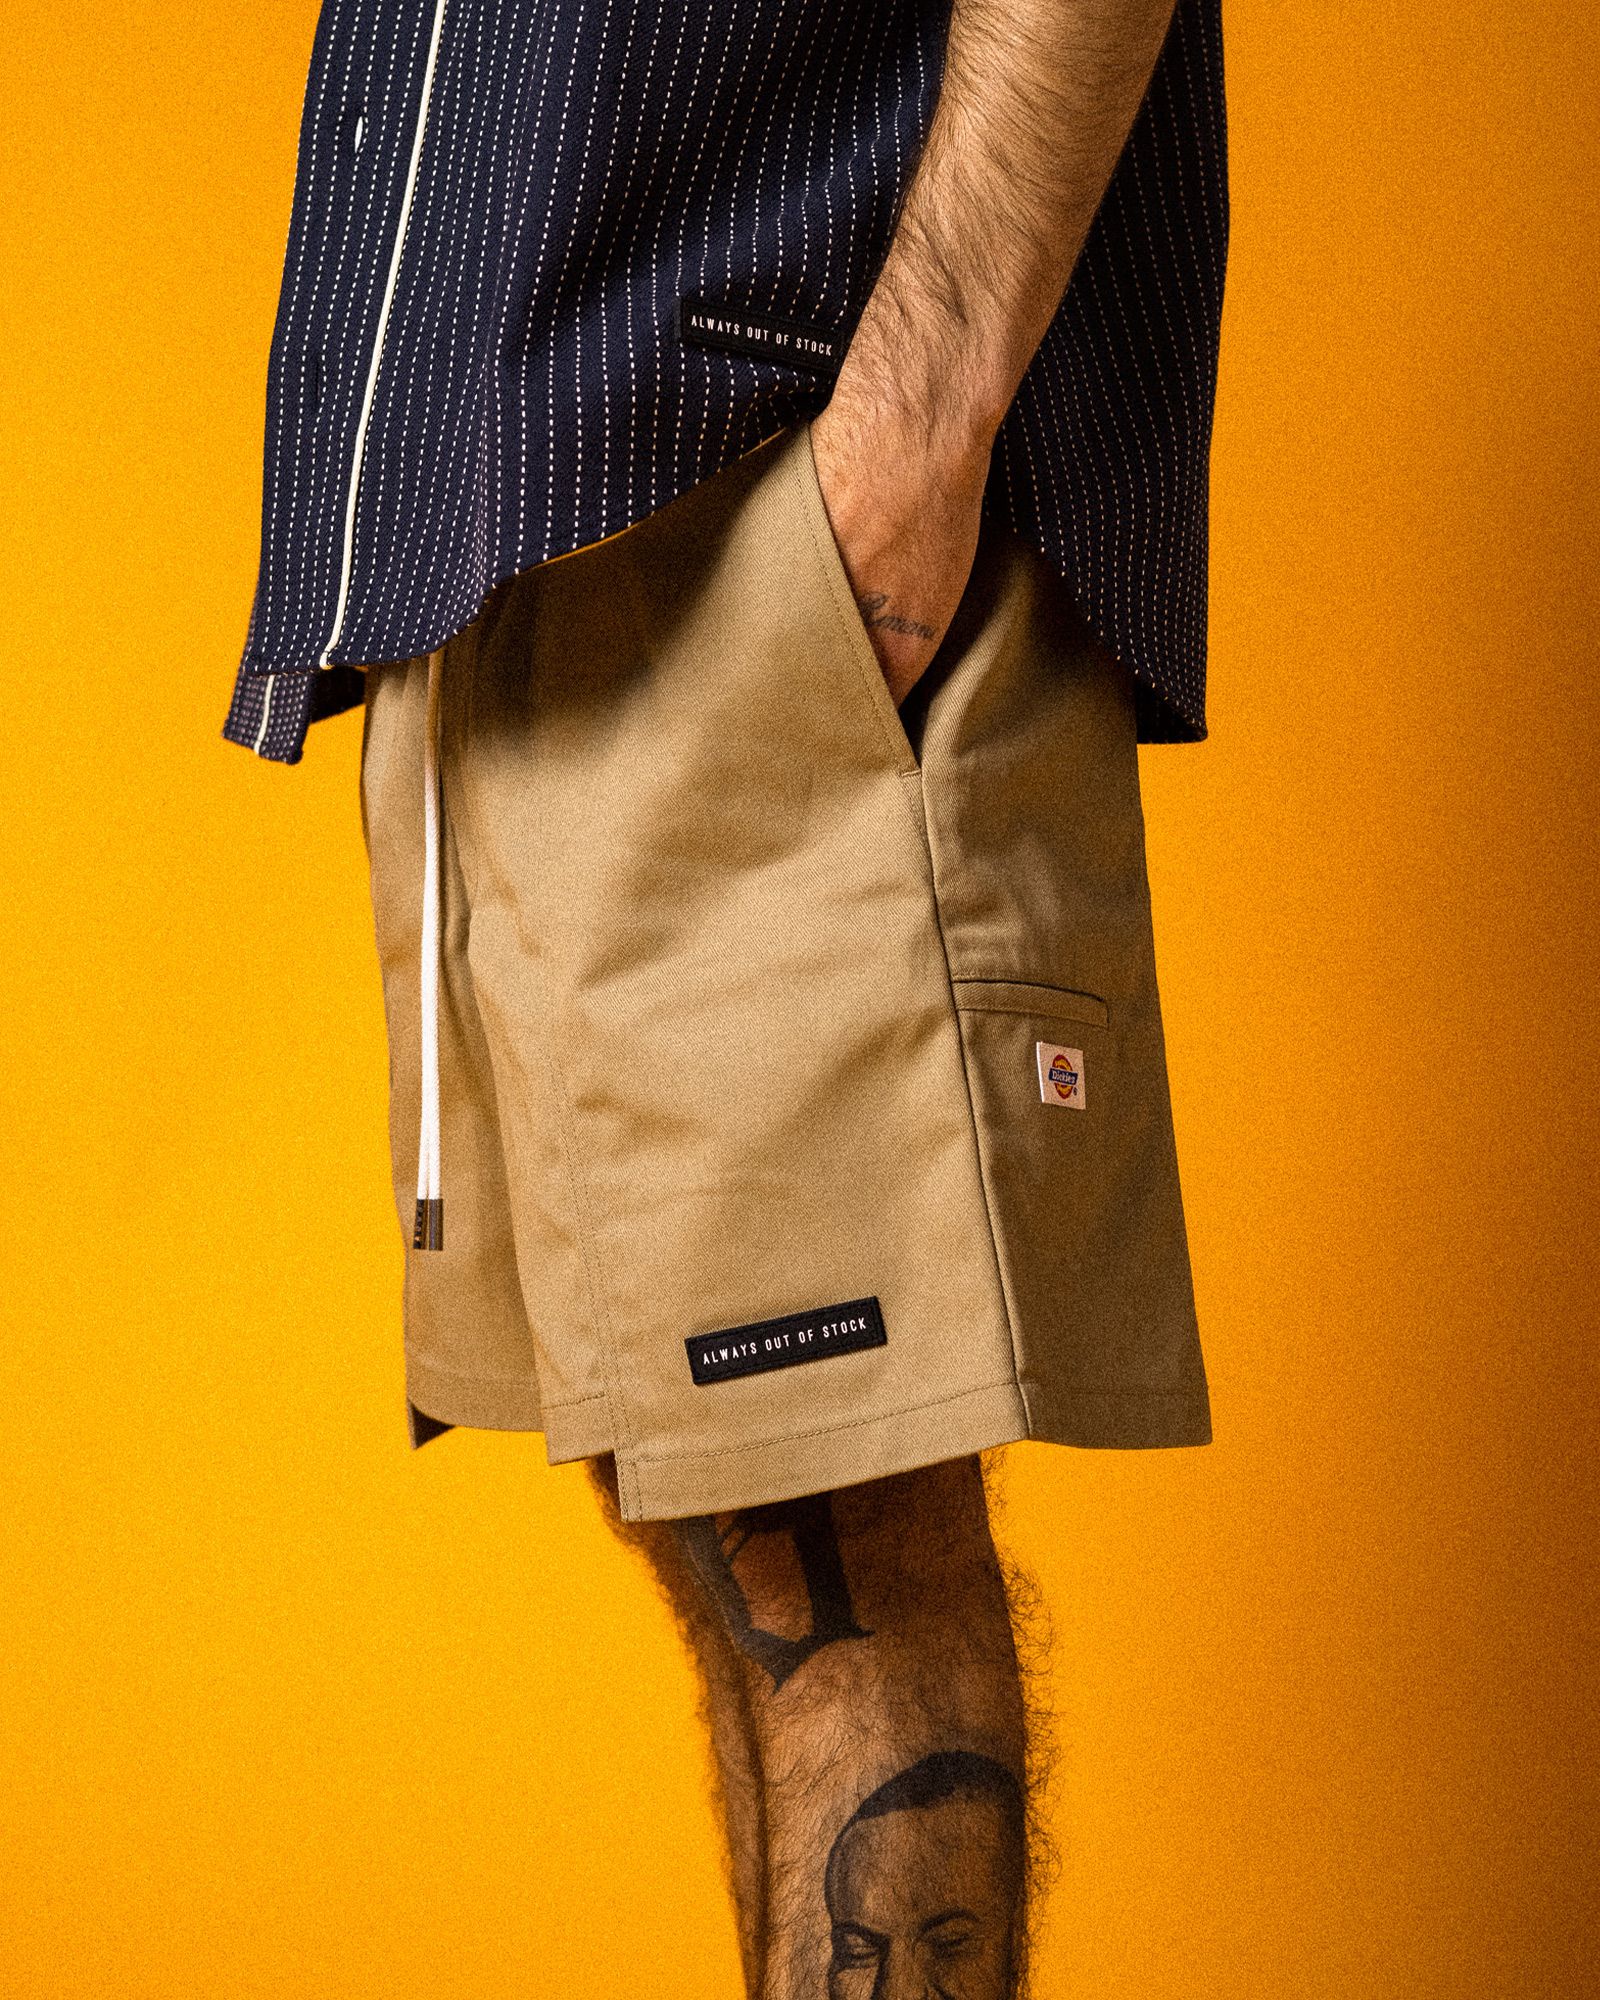 ALWAYS OUT OF STOCK - Always out of stock × Dickies switched